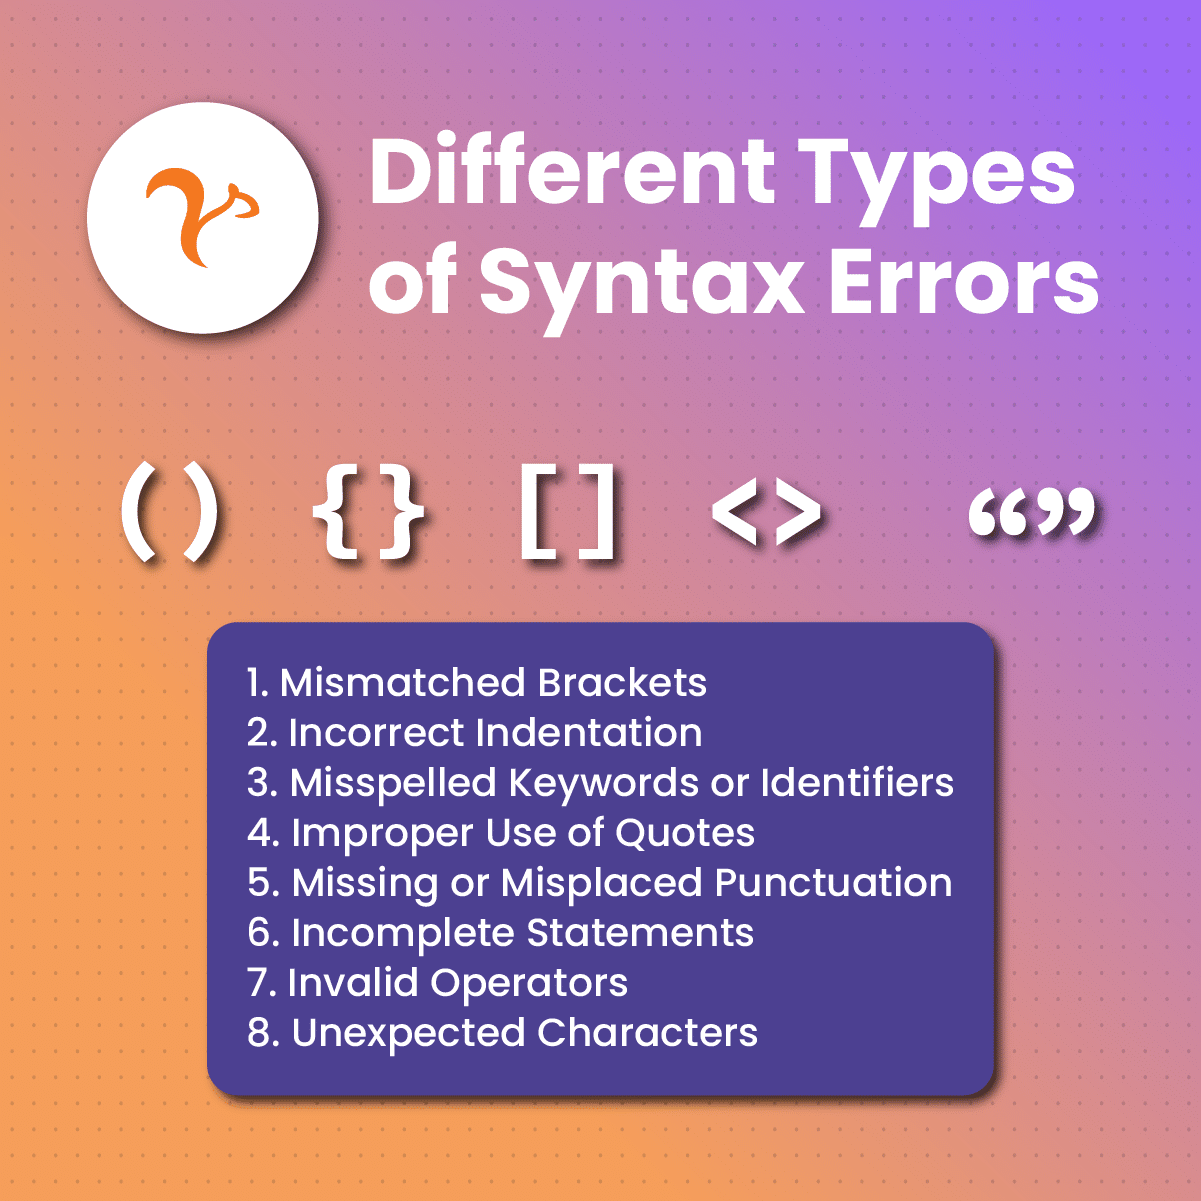 Different Types of Syntax Errors